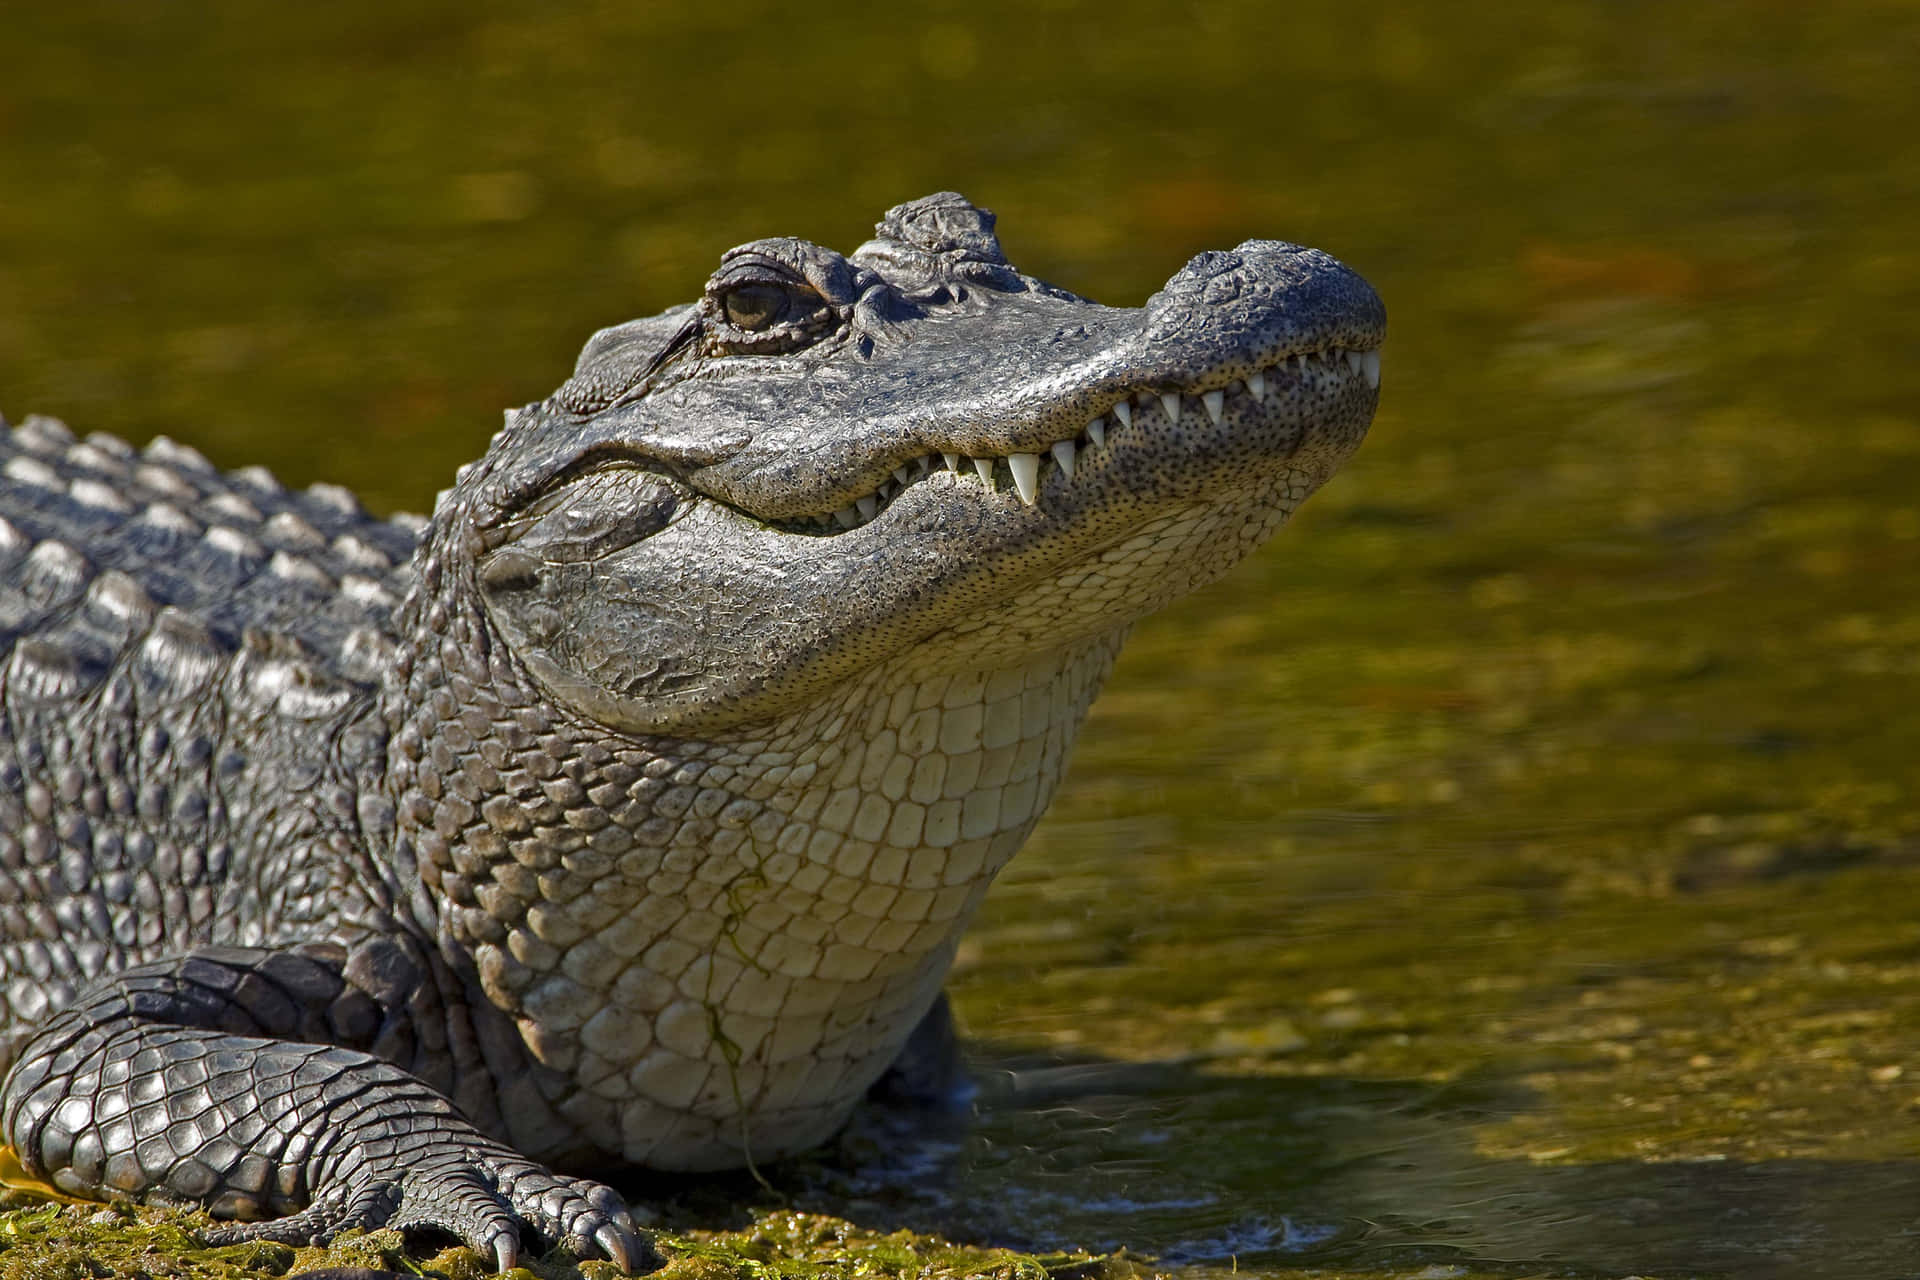 A Closeup of an Alligator's Scales